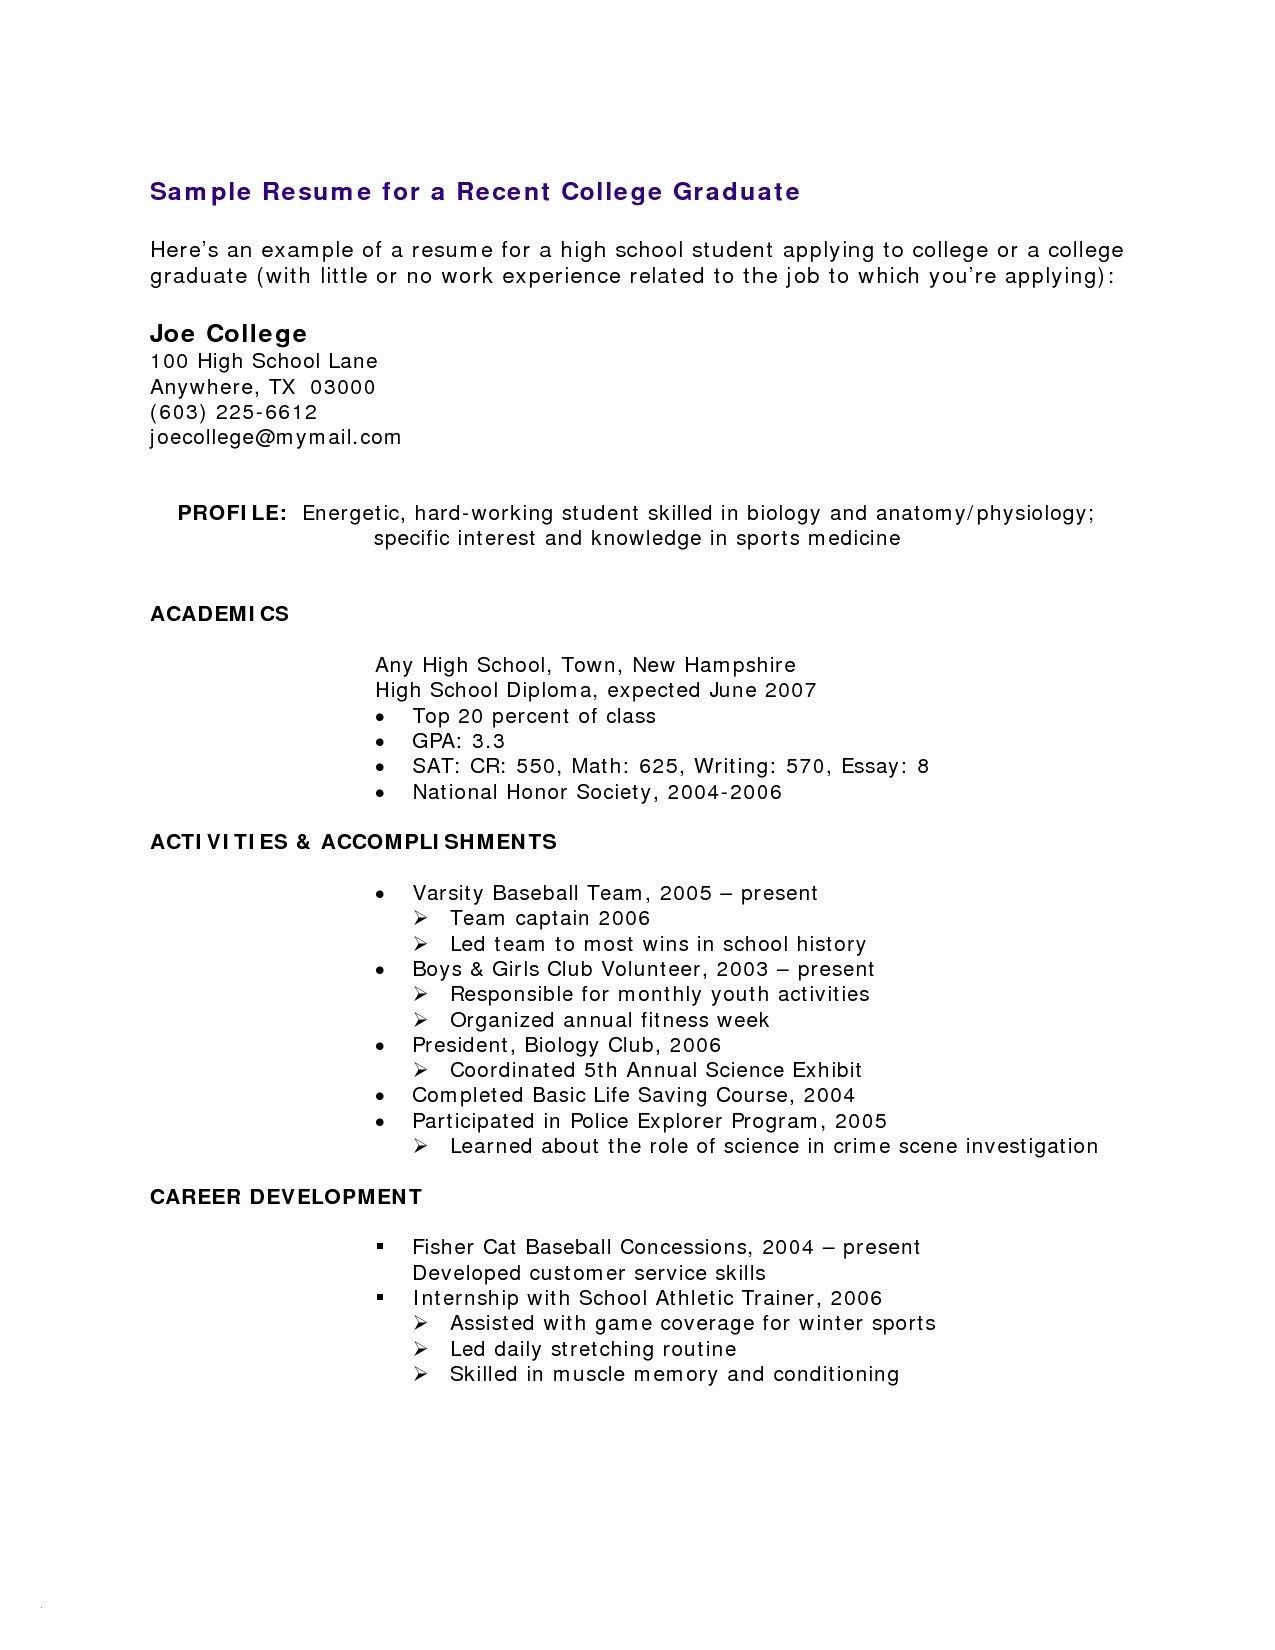 Sample Resume for High School Graduate with No Work Experience Pin On Resume